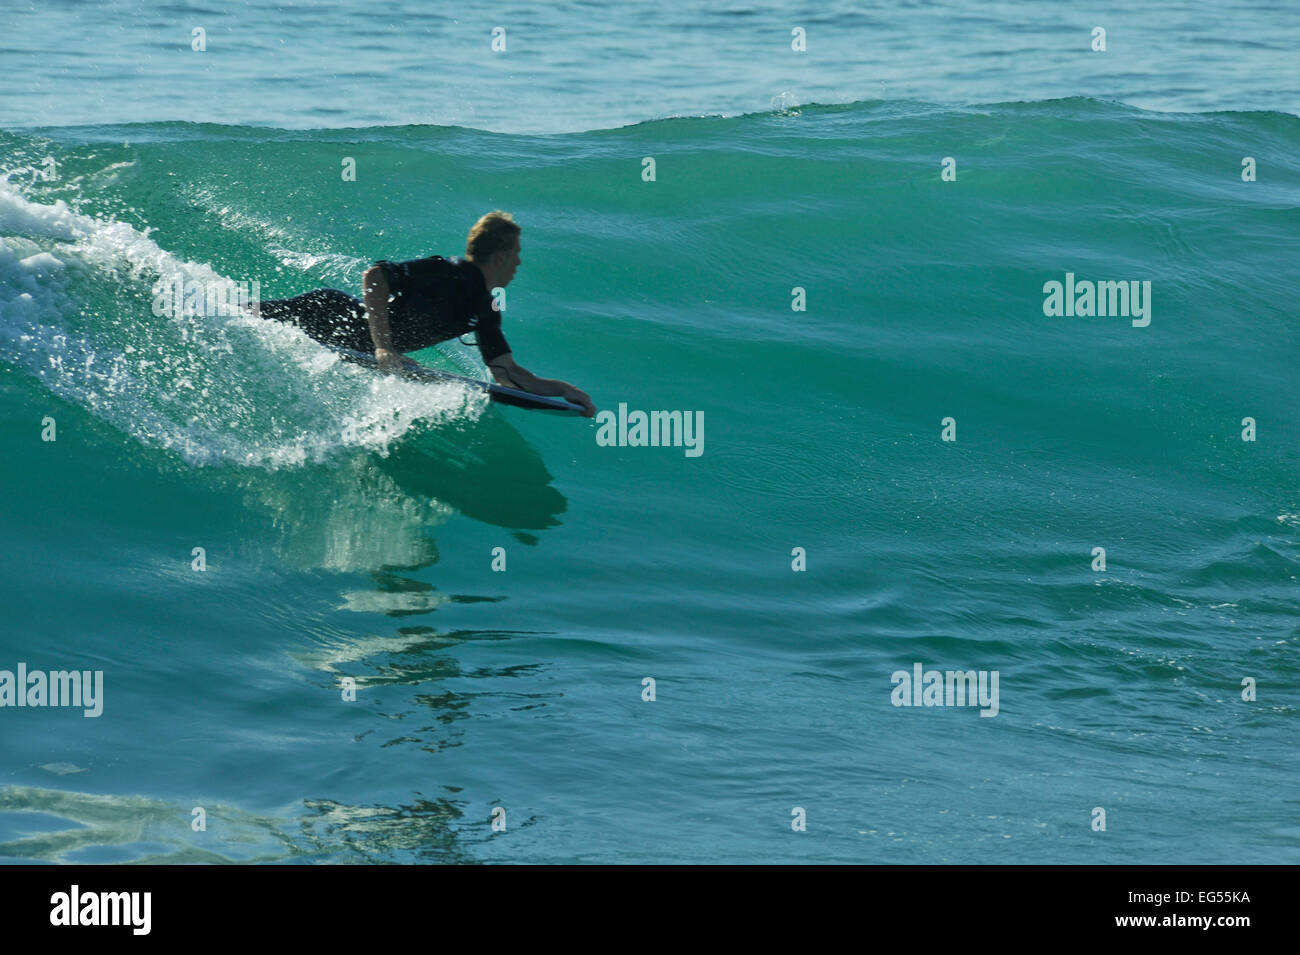 Single adult man in wetsuit on Boogie board riding down perfect wave in bay of Durban, KwaZulu-Natal Stock Photo